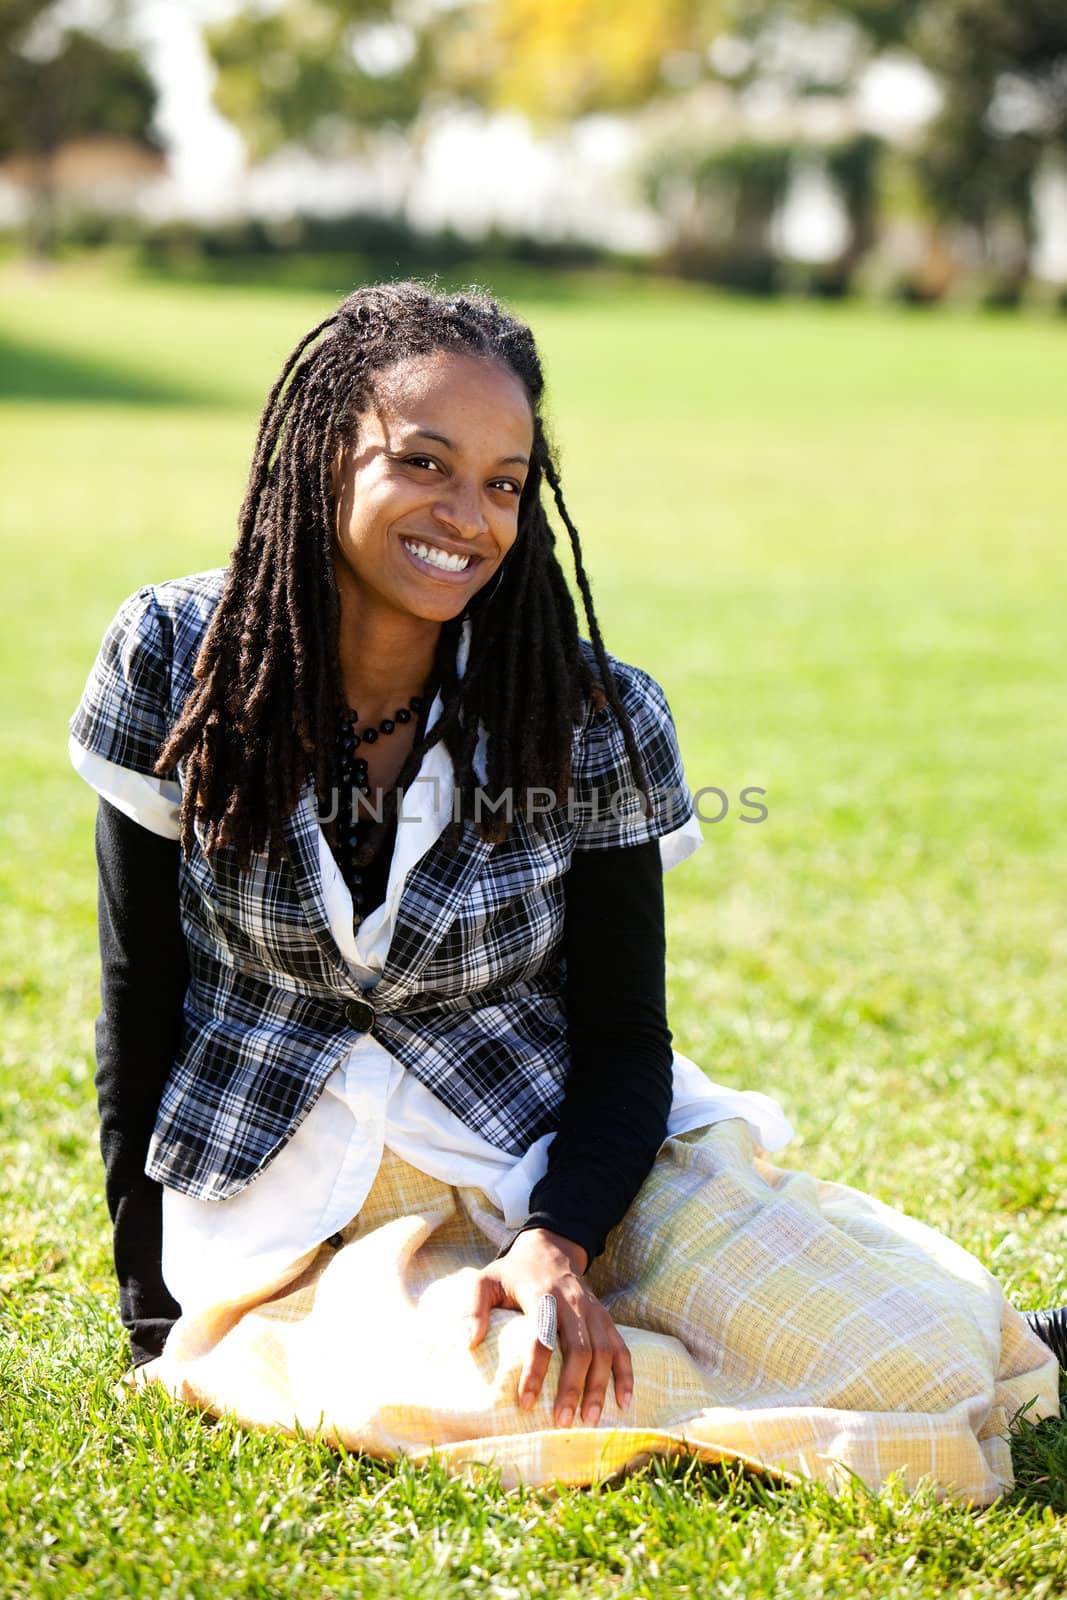 A young African American student sitting on grass